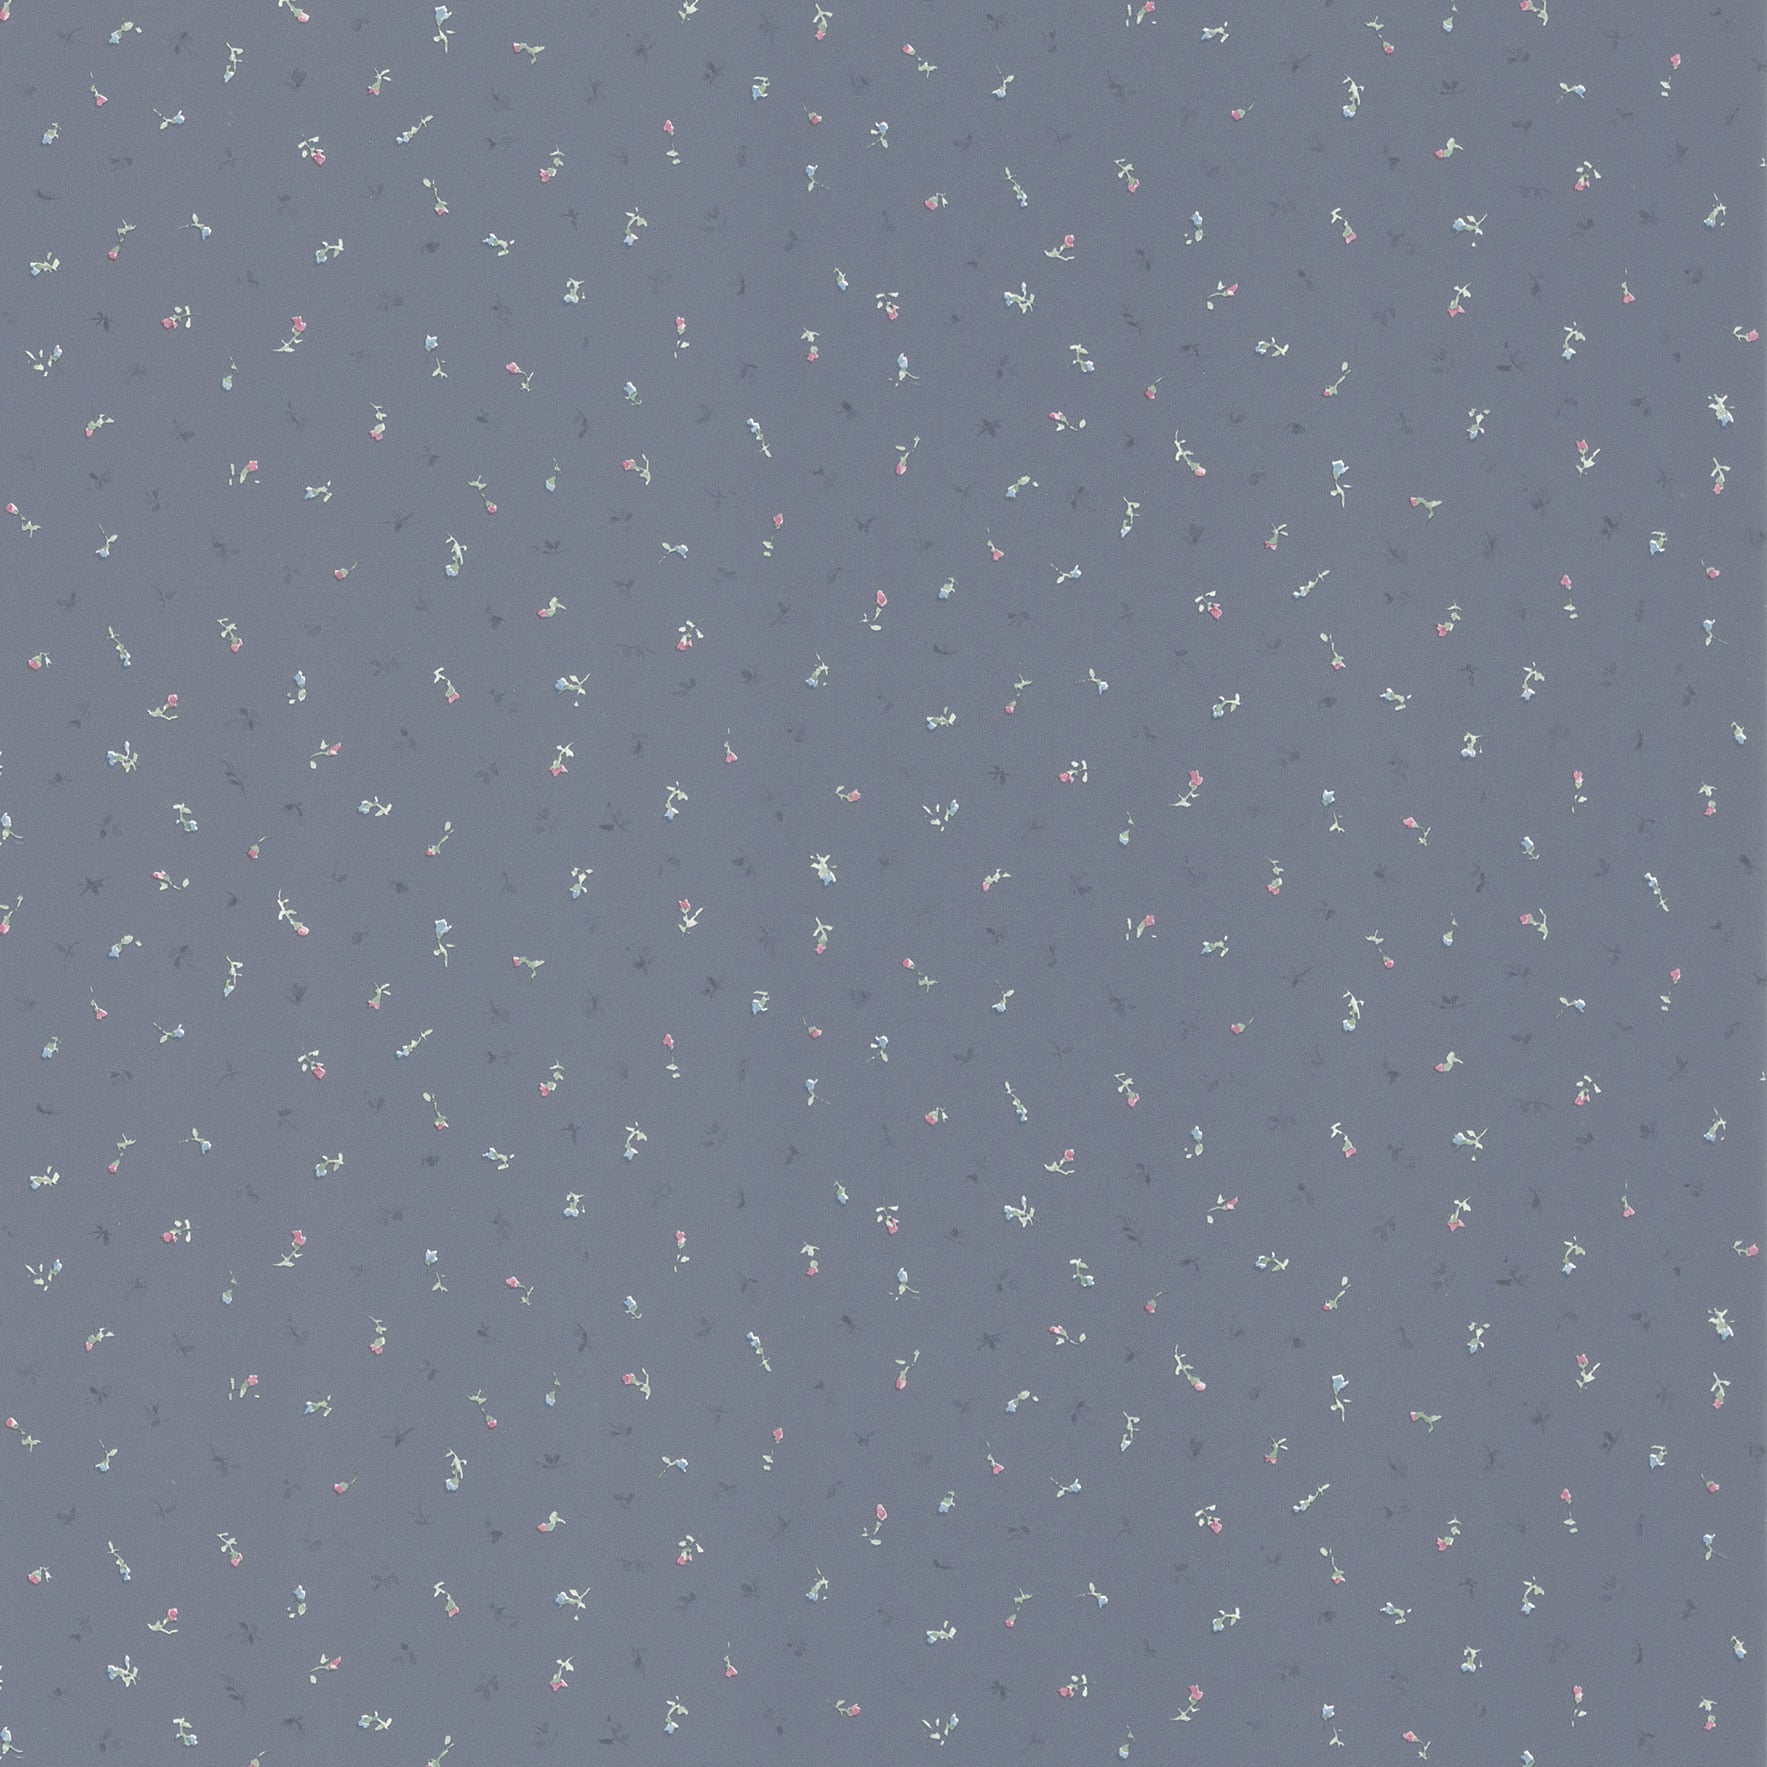 Brewster Dark Grey Floral Toss Wallpaper (Dark GreyDimensions 20.5 inches wide x 33 feet longBoy/Girl/Neutral NeutralTheme TraditionalMaterials Solid Sheet VinylCare Instructions ScrubbableHanging Instructions PrepastedRepeat 10.25 inchesMatch Str